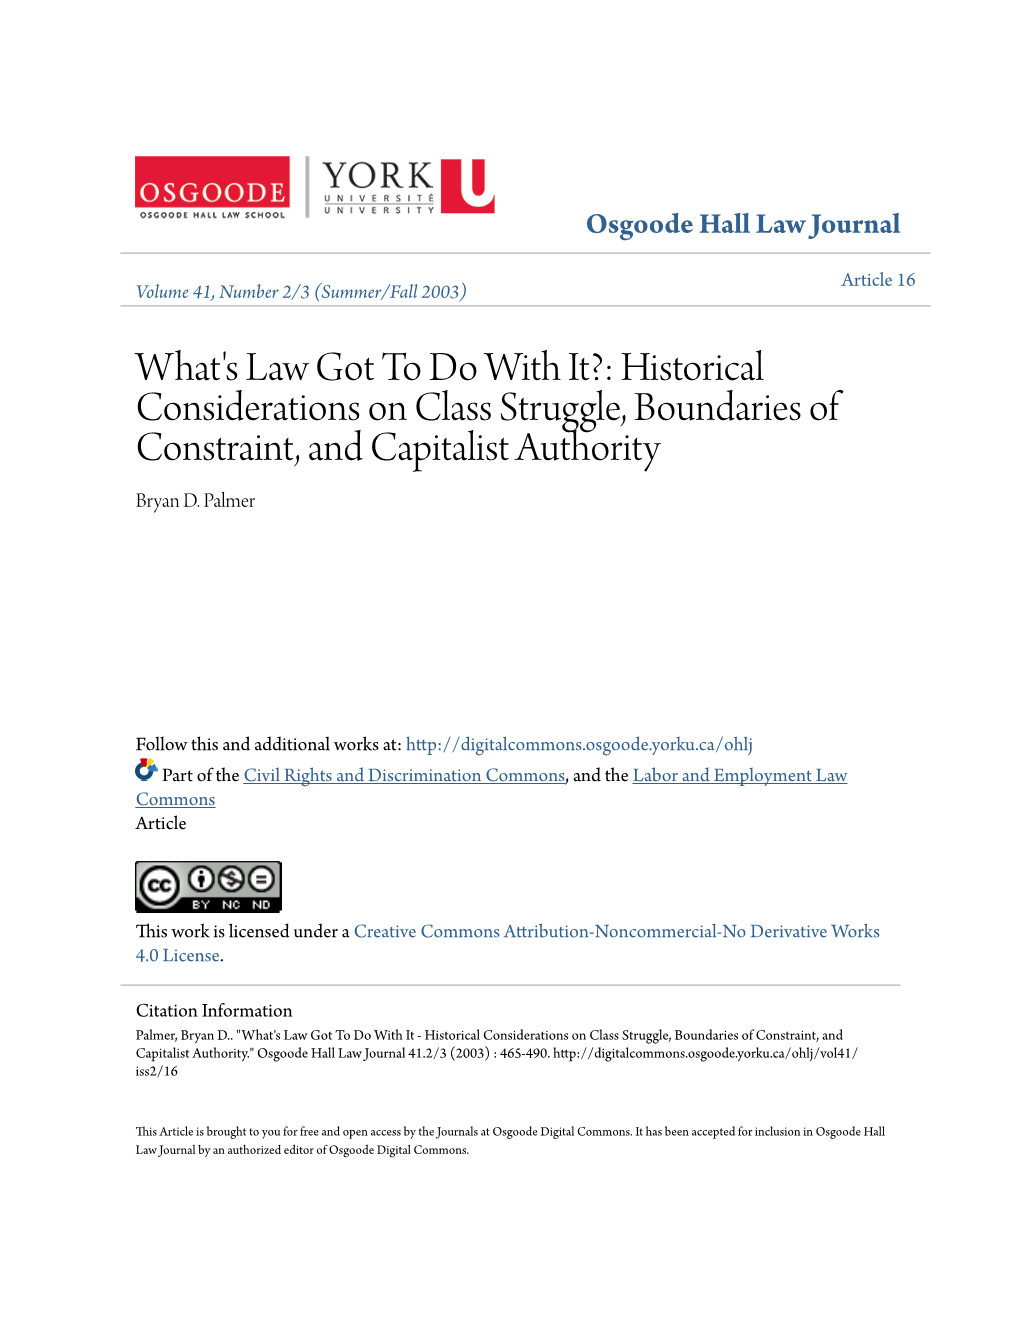 What's Law Got to Do with It?: Historical Considerations on Class Struggle, Boundaries of Constraint, and Capitalist Authority Bryan D